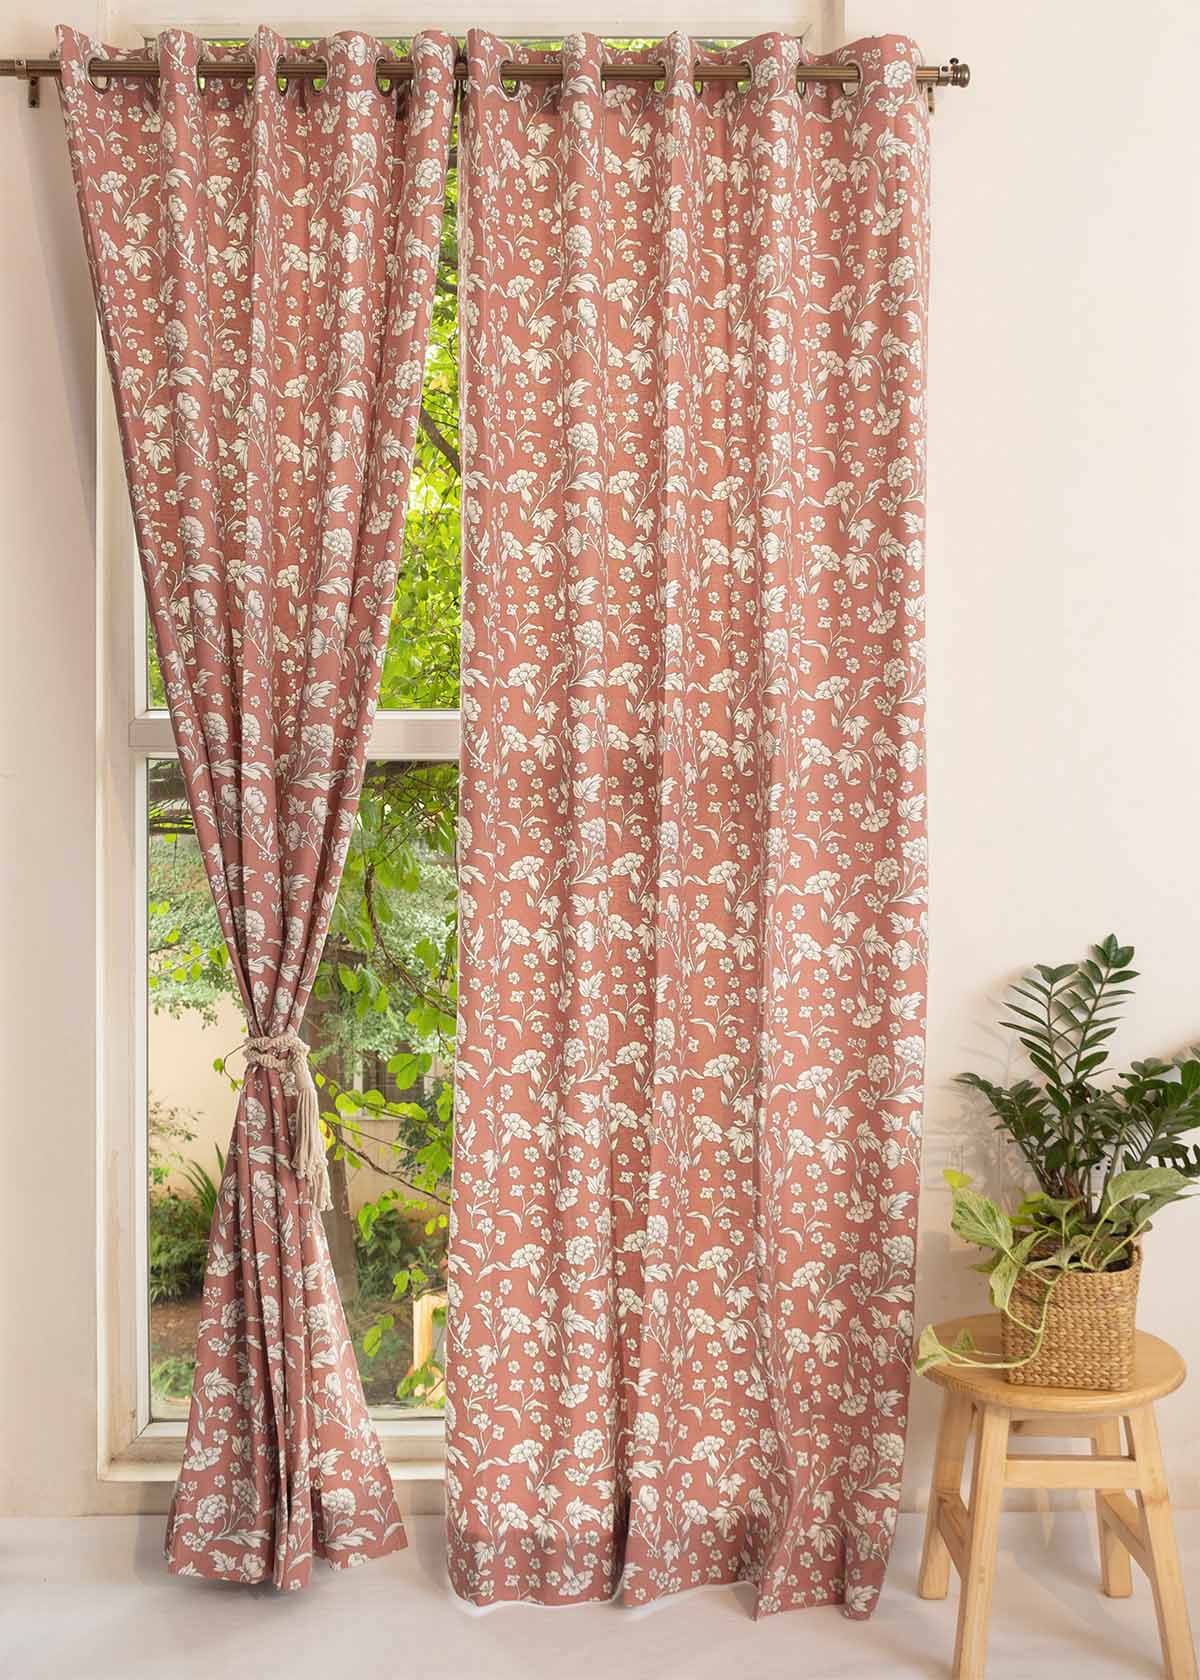 Marigold 100% Customizable Cotton floral curtain for living room - Room darkening - Rust